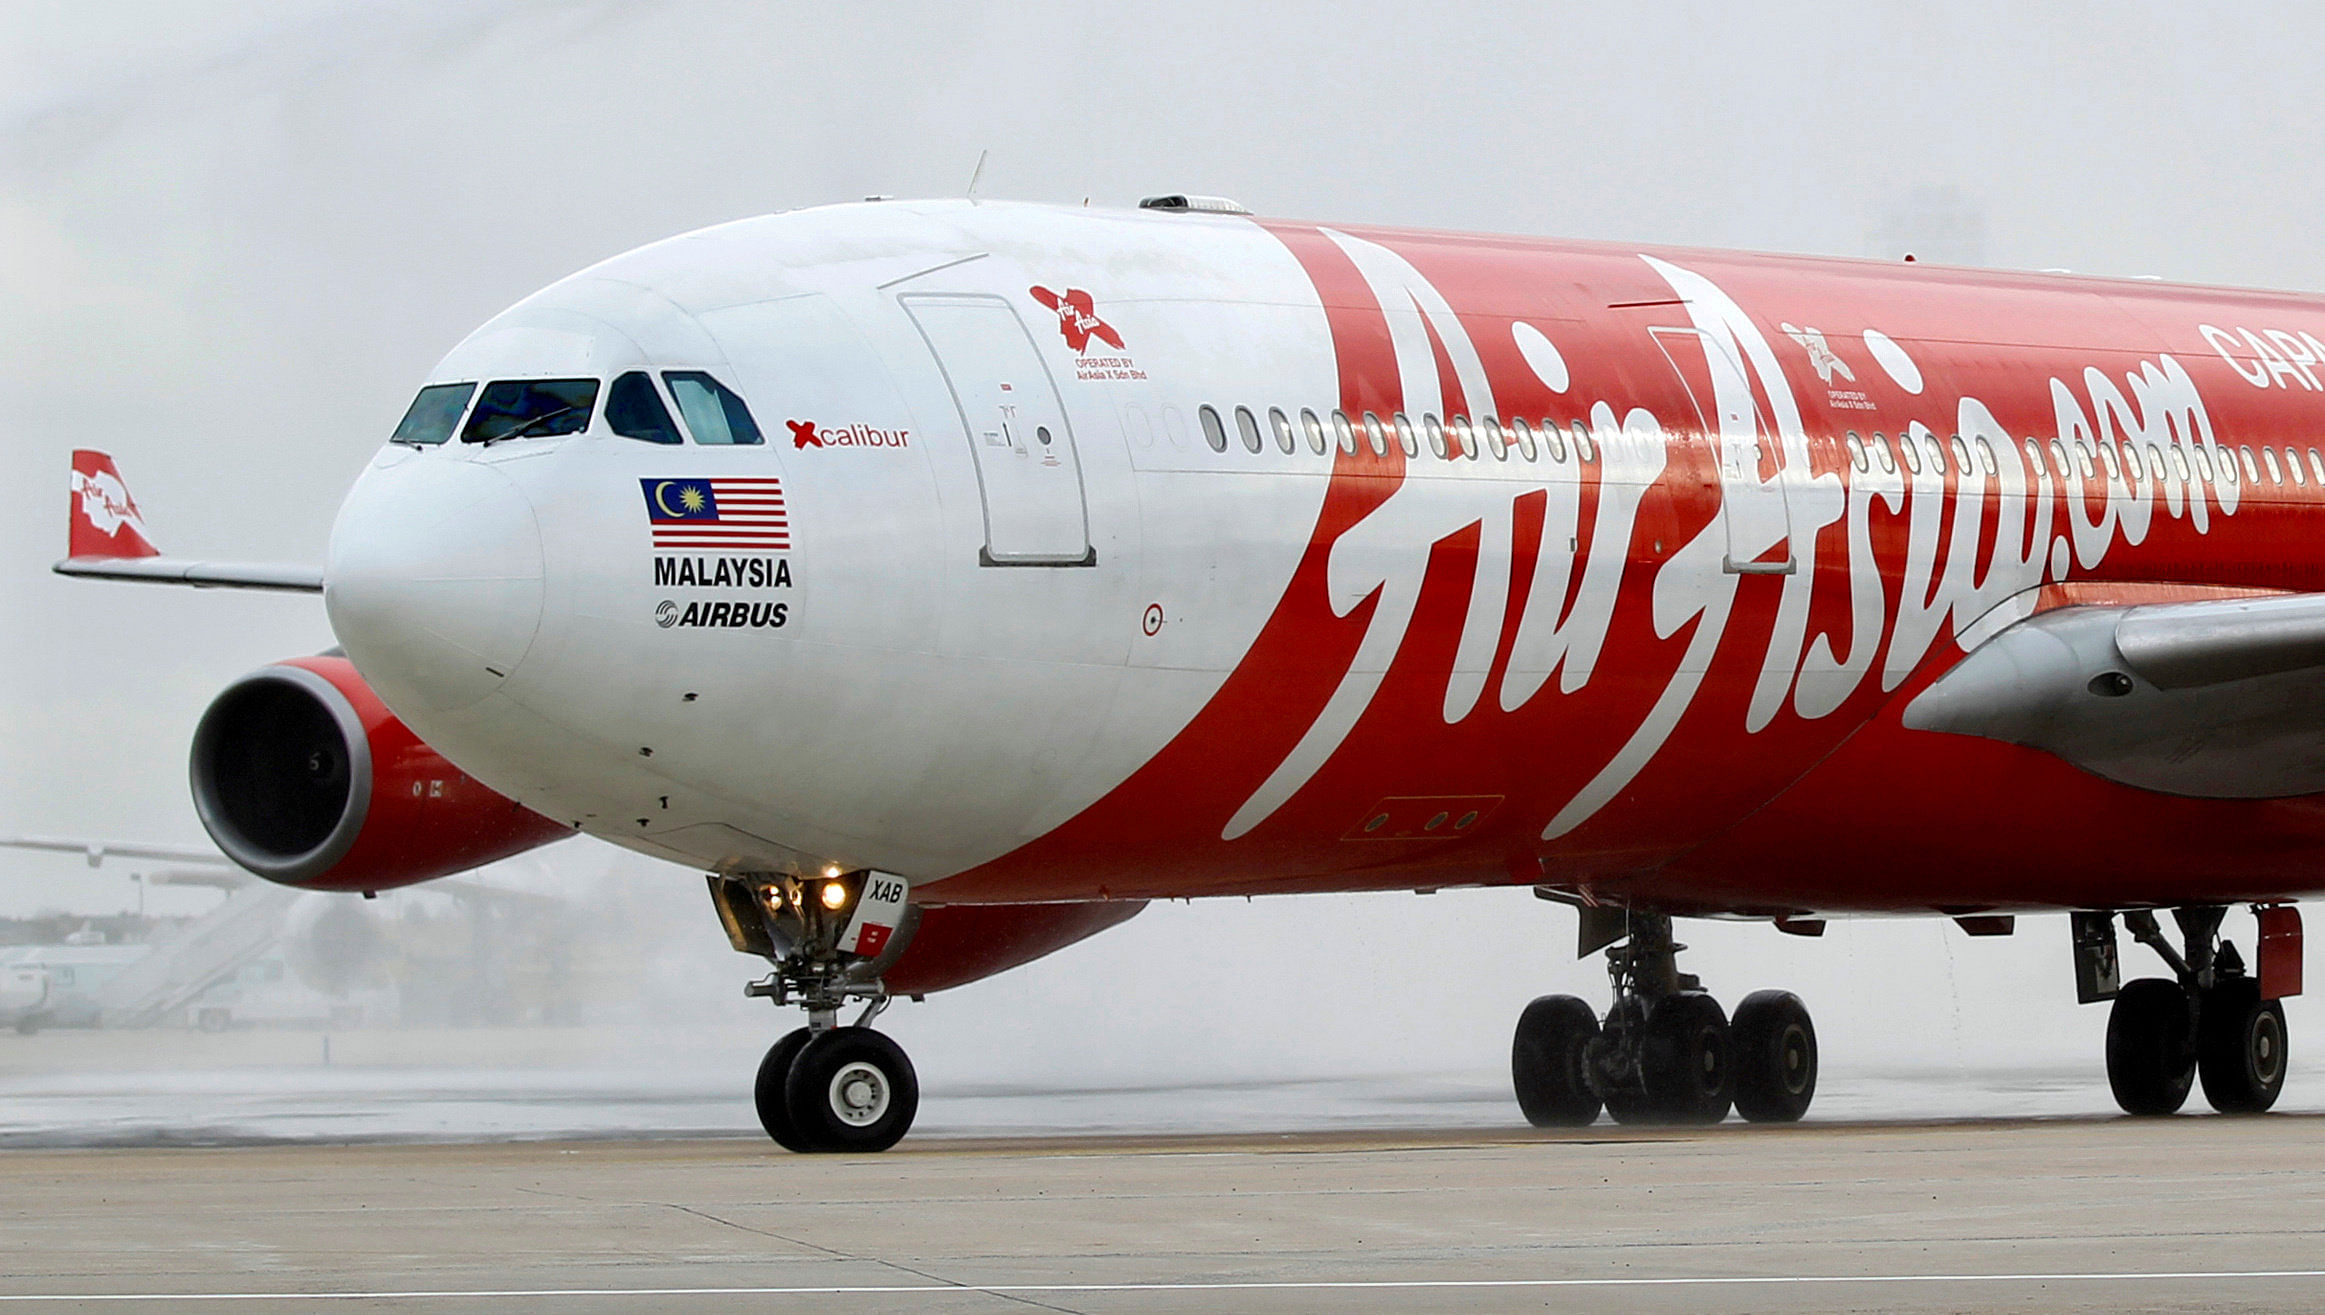 In a statement, the AirAsia Group said it "vigorously" denies all accusations and contentions, and believe that these "trumped up accusations are baseless and motivated by considerations that as yet remain unknown". Reuters file photo